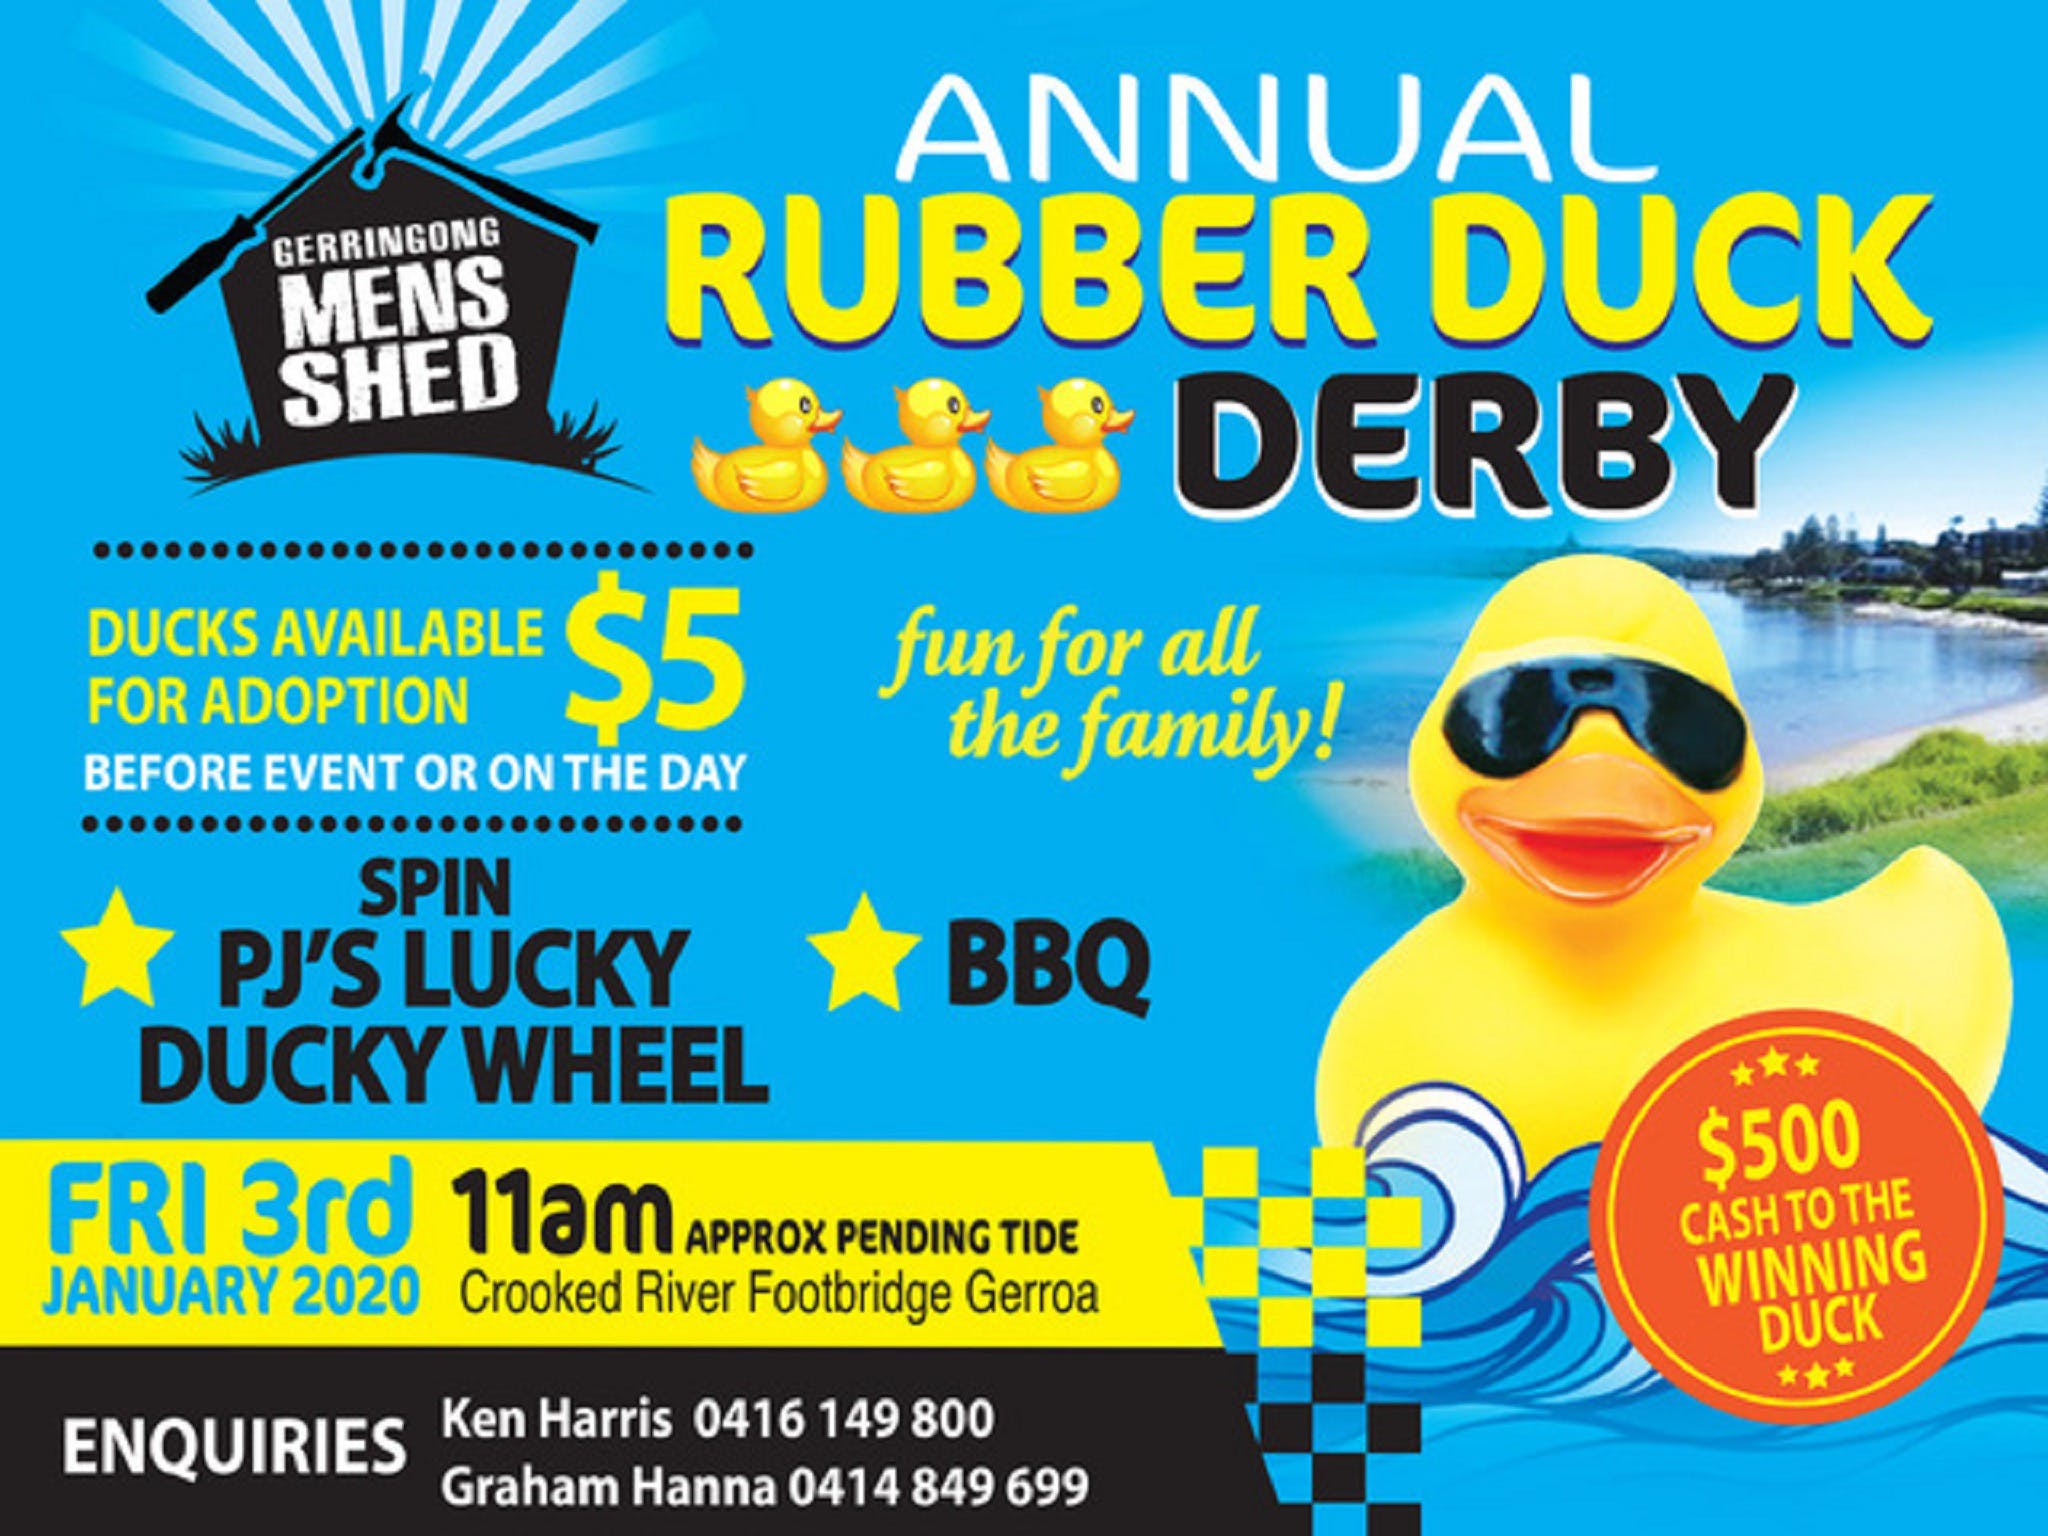 Gerringong Mens Shed Annual Duck Derby - Wagga Wagga Accommodation